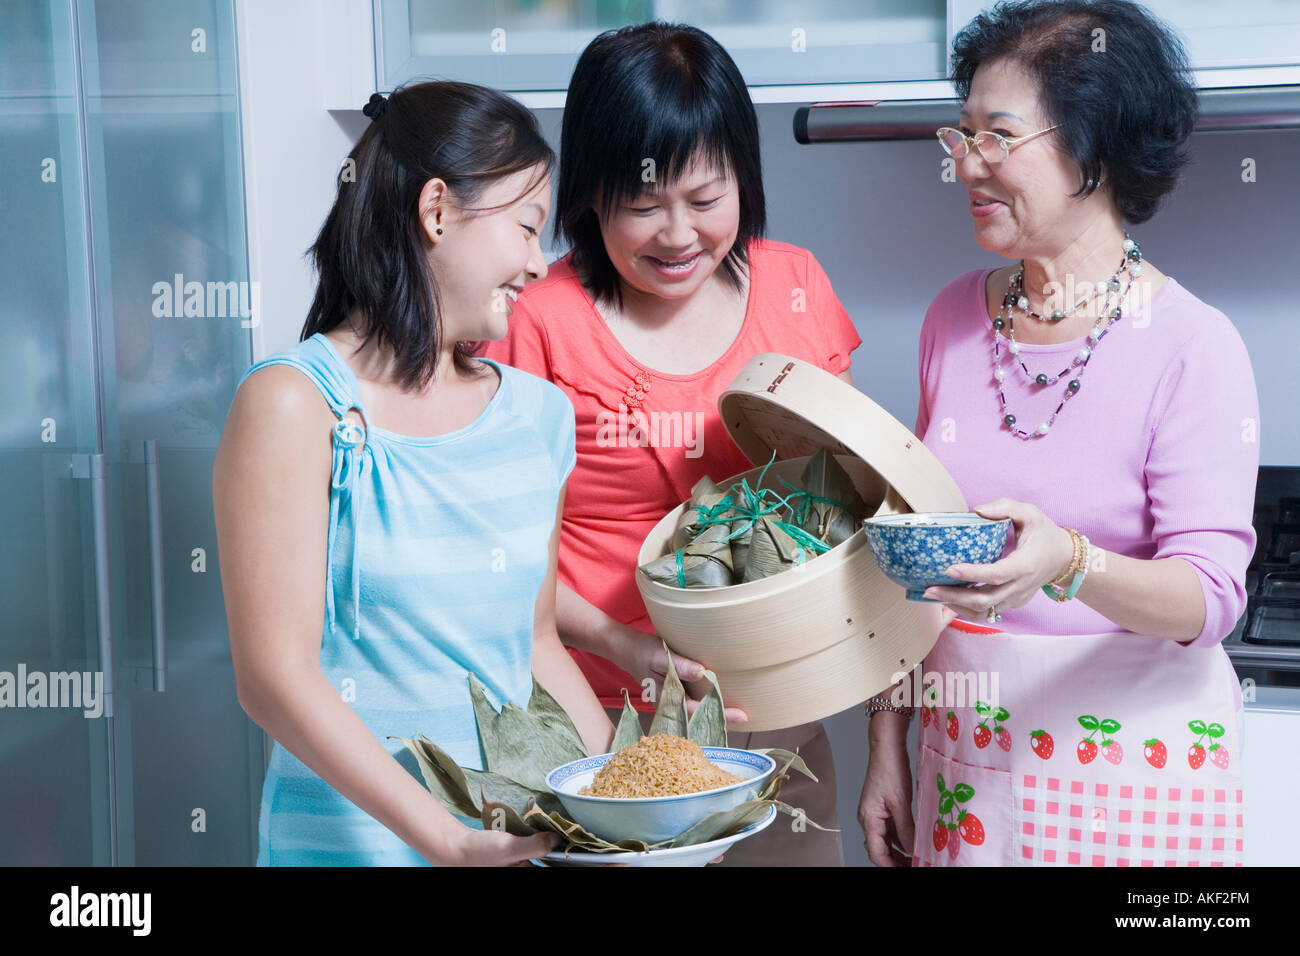 Senior woman with her daughter and granddaughter in a kitchen Stock Photo